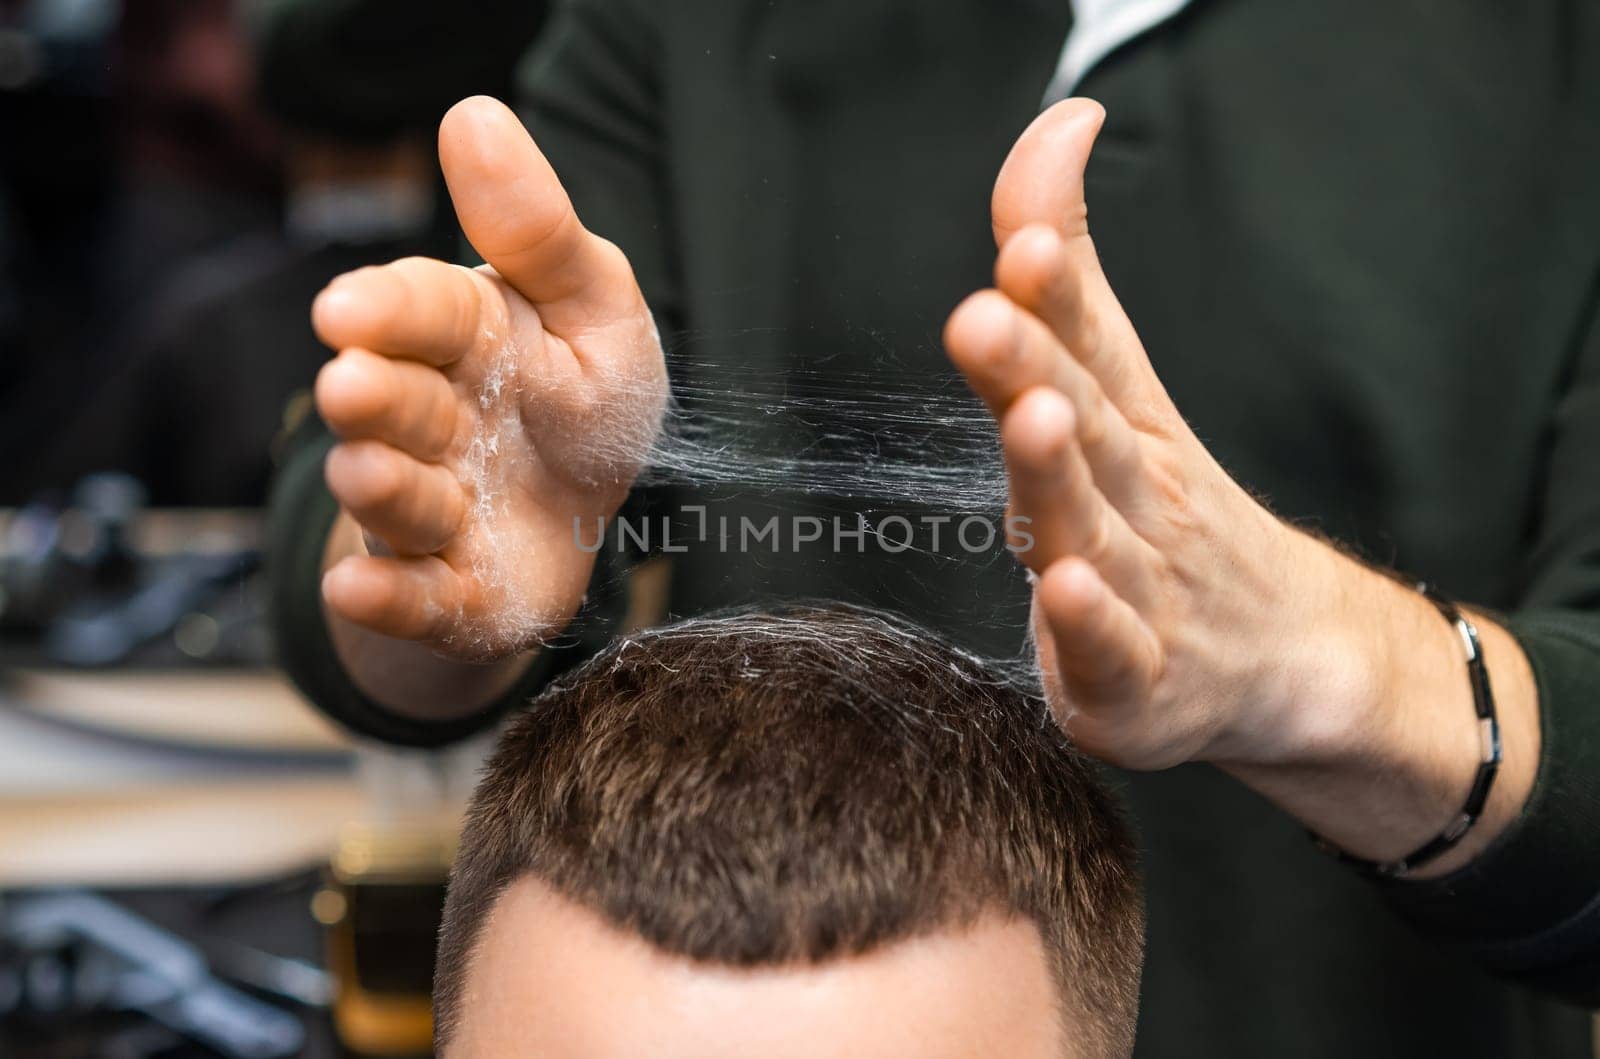 Hairdresser adjusts freshly cut hair of client in barbershop closeup. Careful stylist tousles haircut serving man in grooming salon